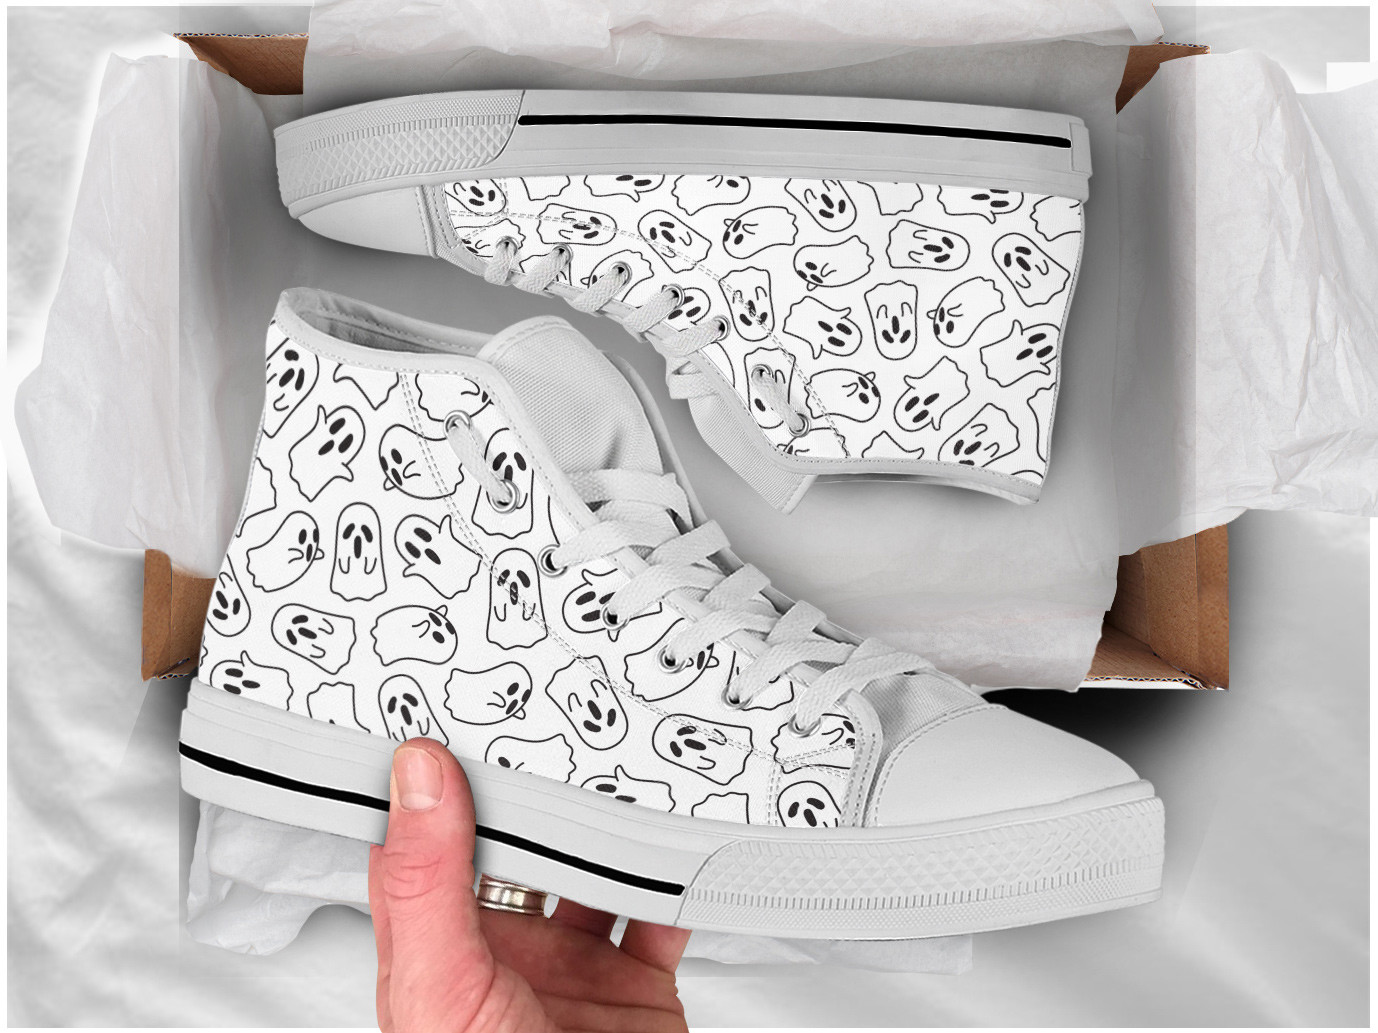 White Ghost Shoes | Custom High Top Sneakers For Kids & Adults